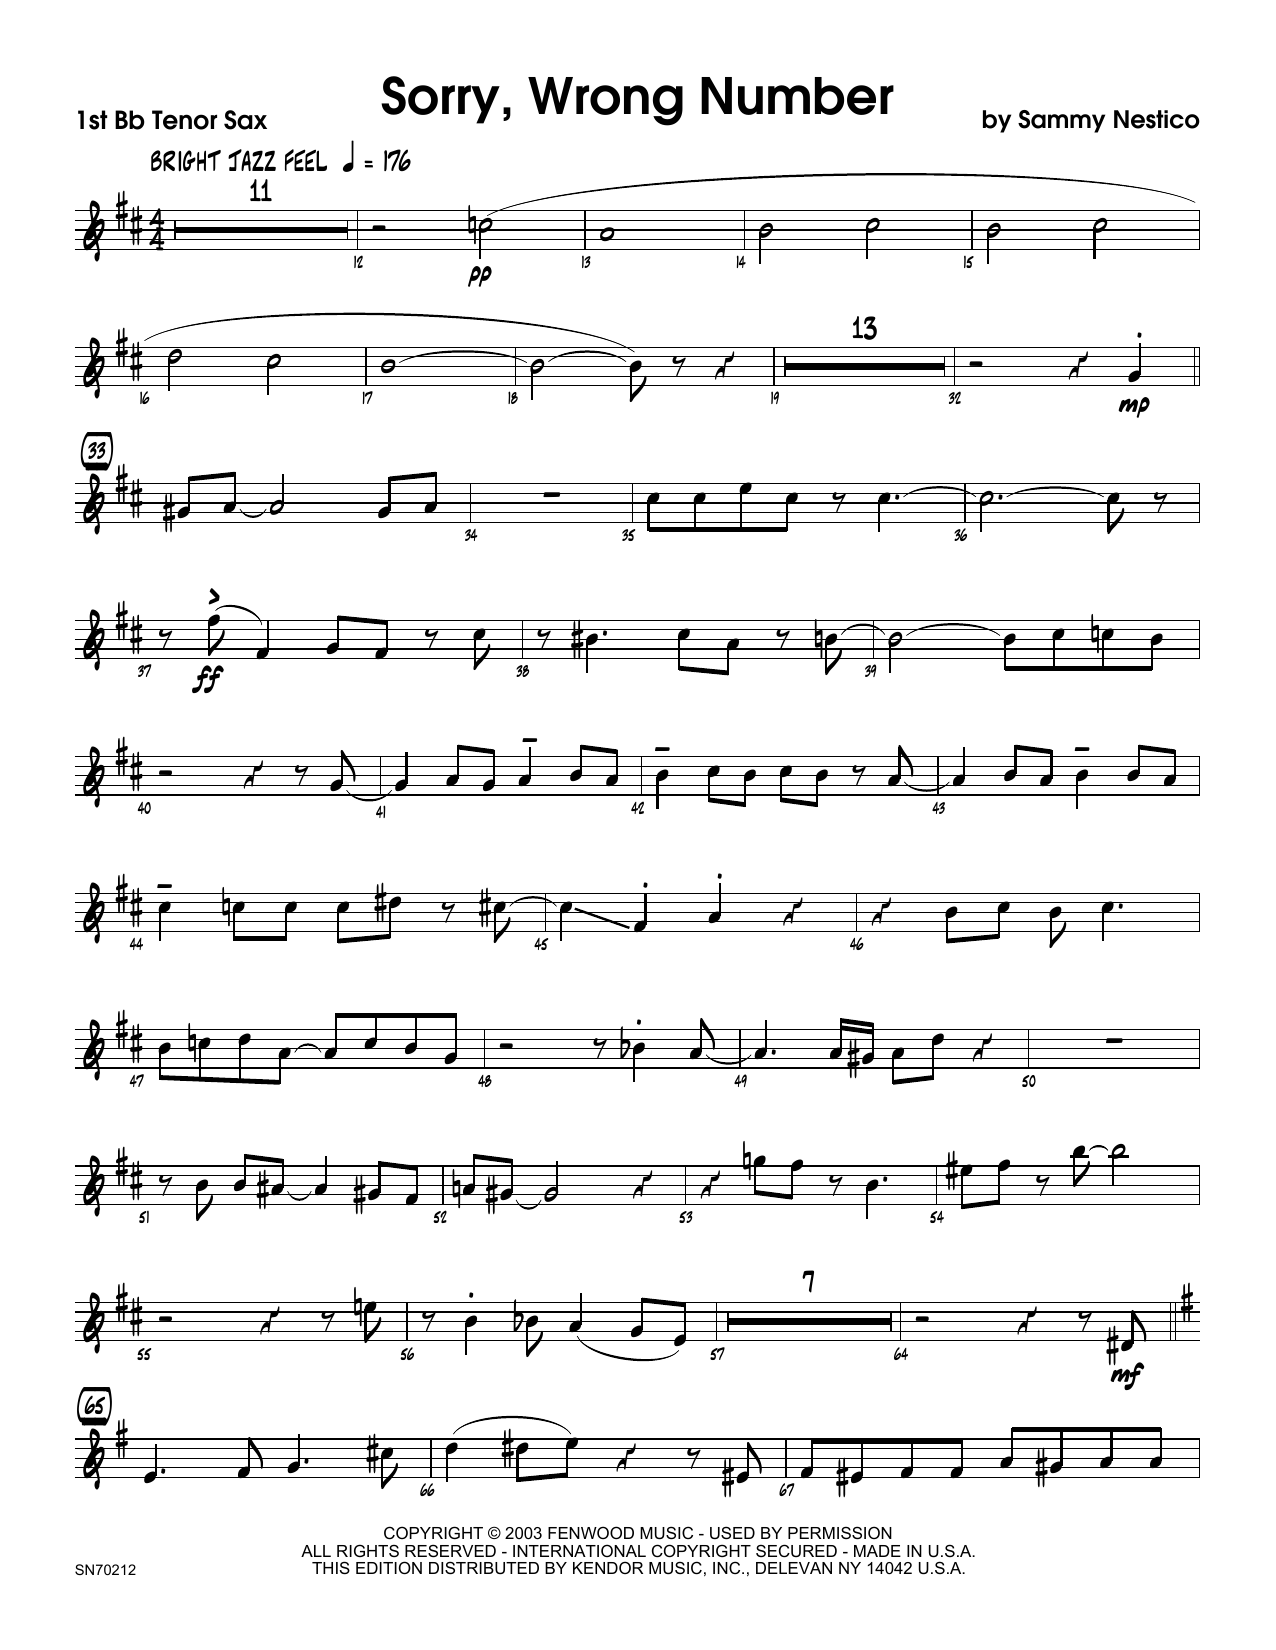 Download Sammy Nestico Sorry, Wrong Number - 1st Tenor Saxopho Sheet Music